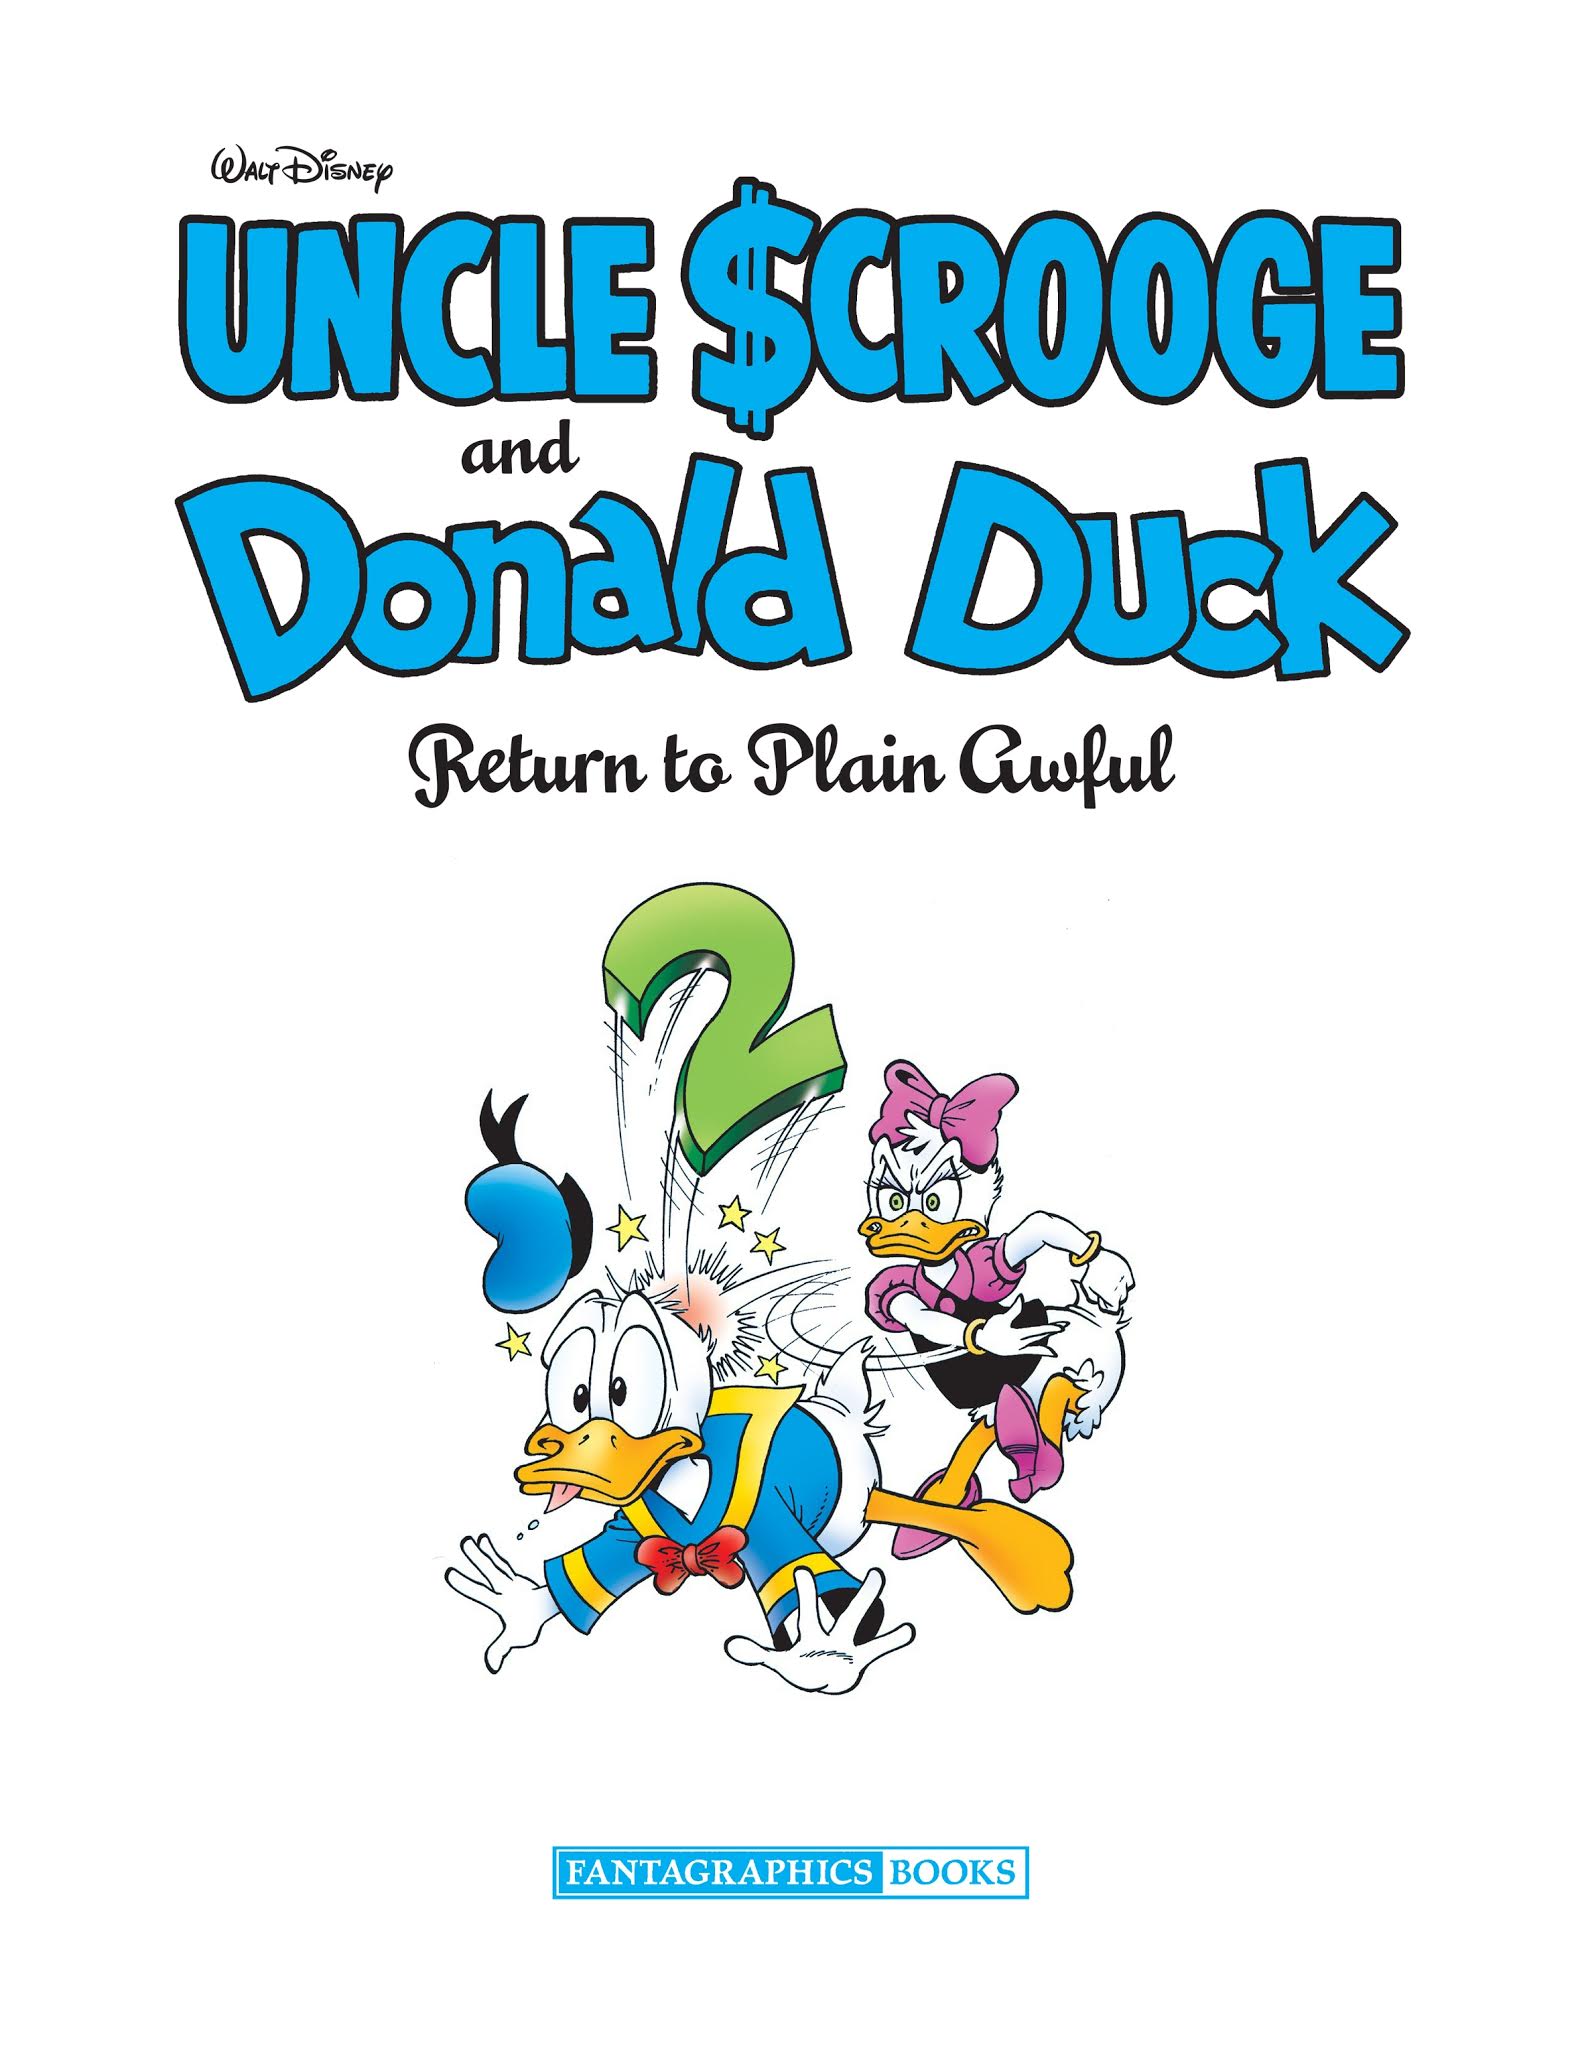 Read online Walt Disney Uncle Scrooge and Donald Duck: The Don Rosa Library comic -  Issue # TPB 2 (Part 1) - 4